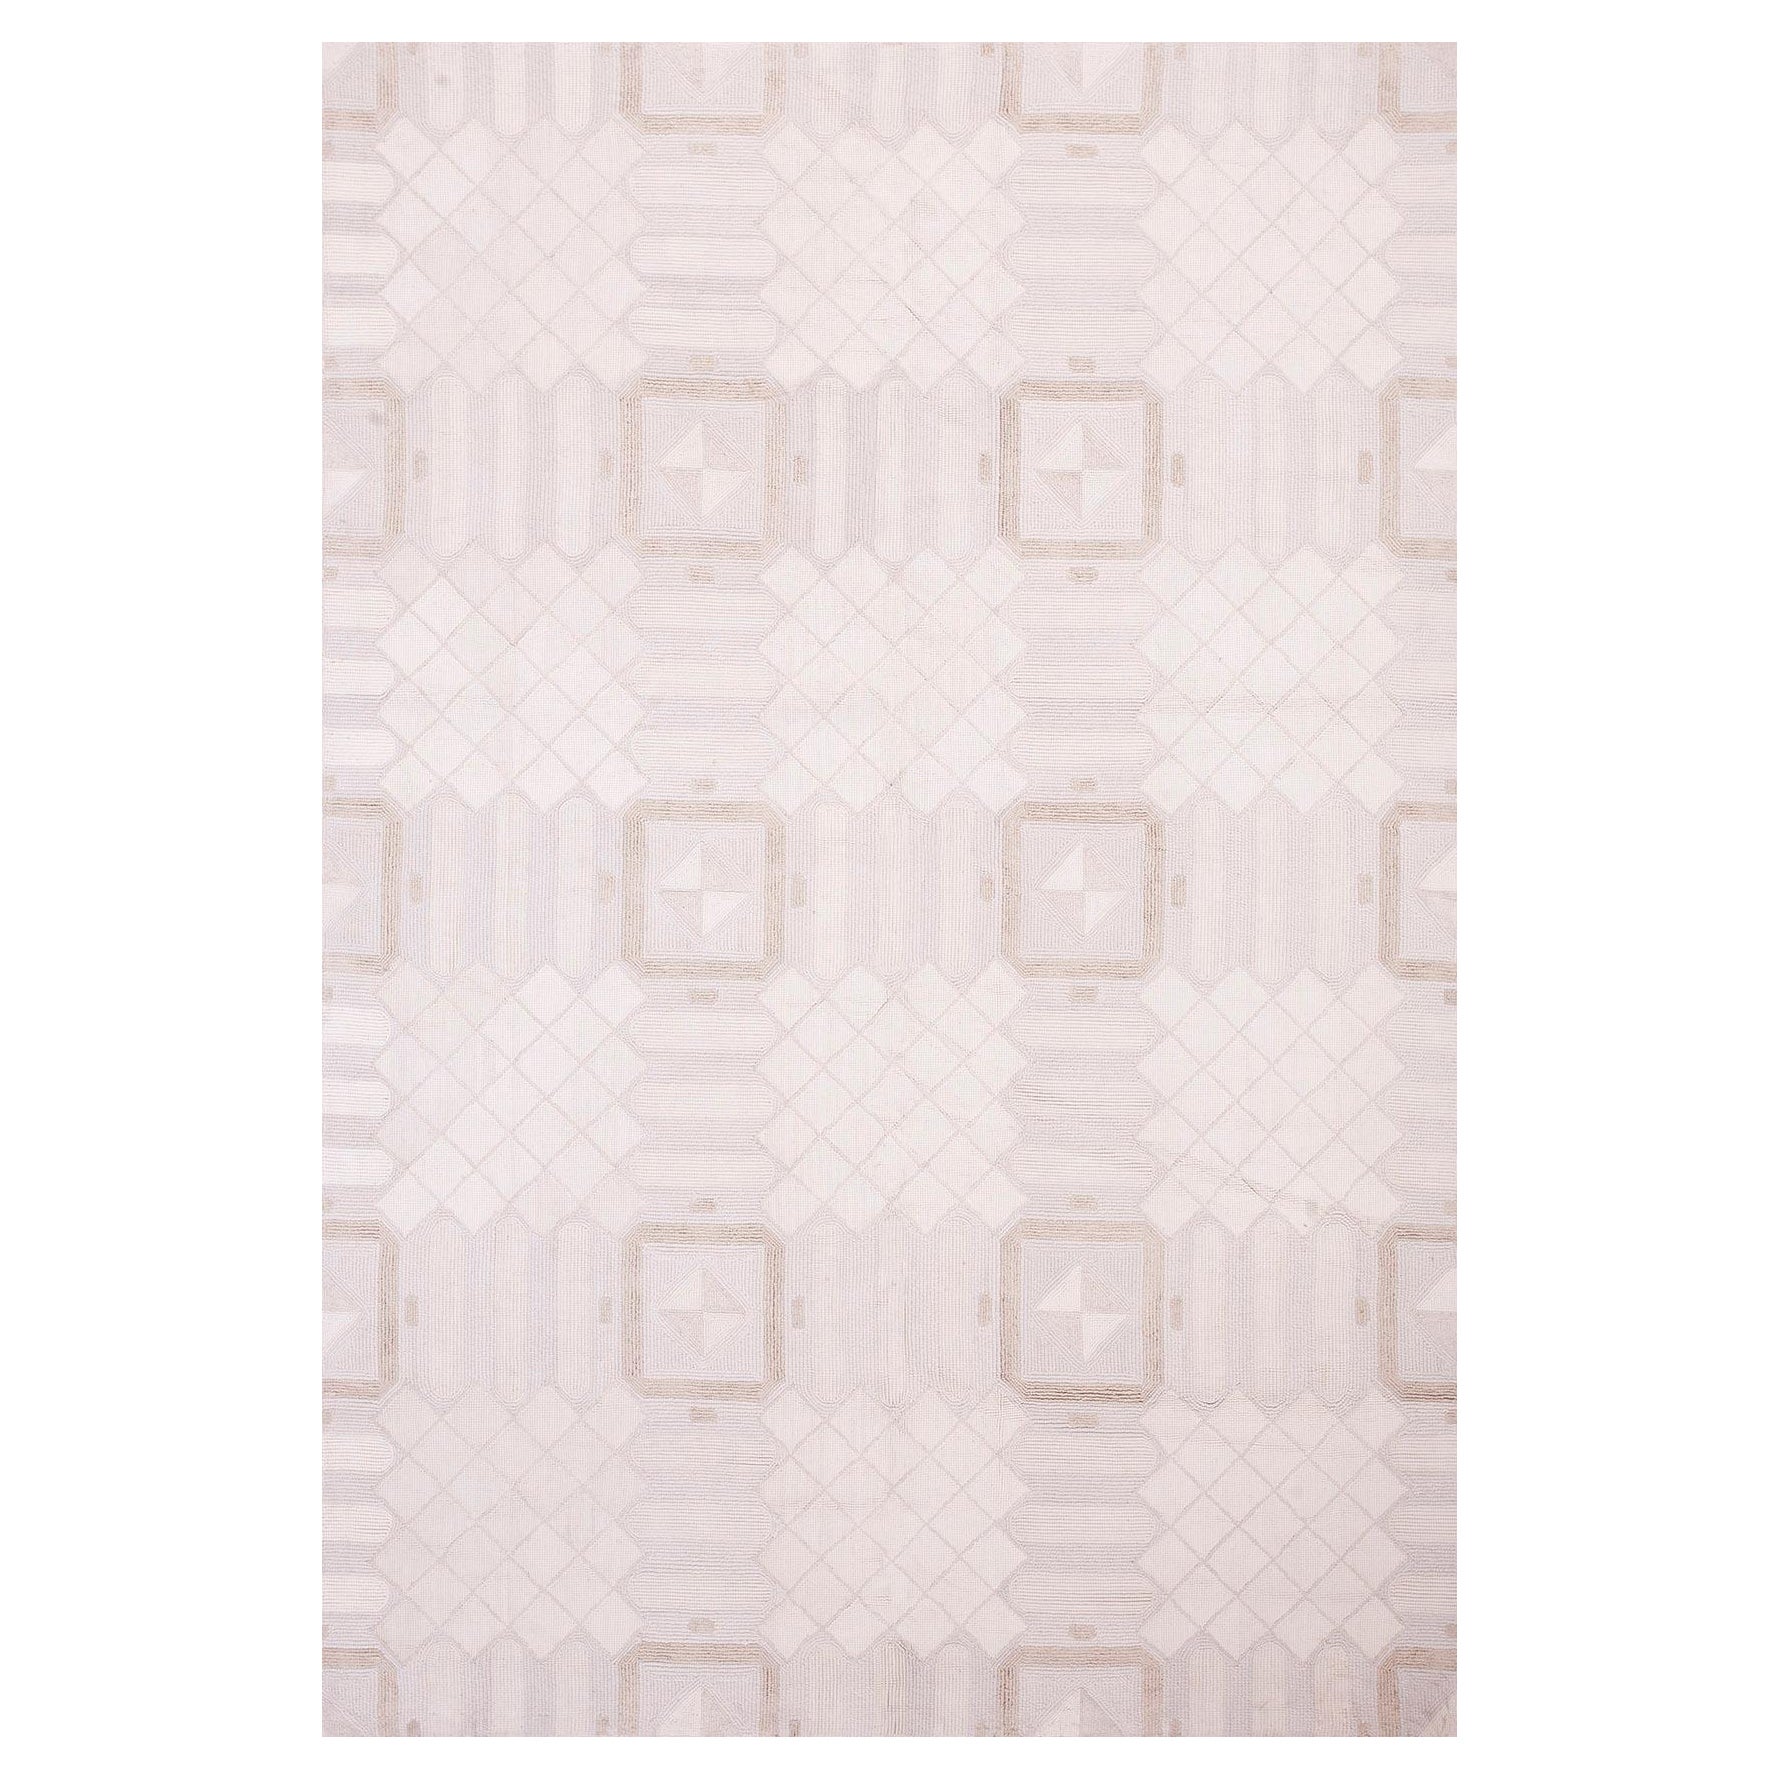 Contemporary American Cotton Hooked Rug 6' 0" x 9' 0" (183 x 274 cm) For Sale